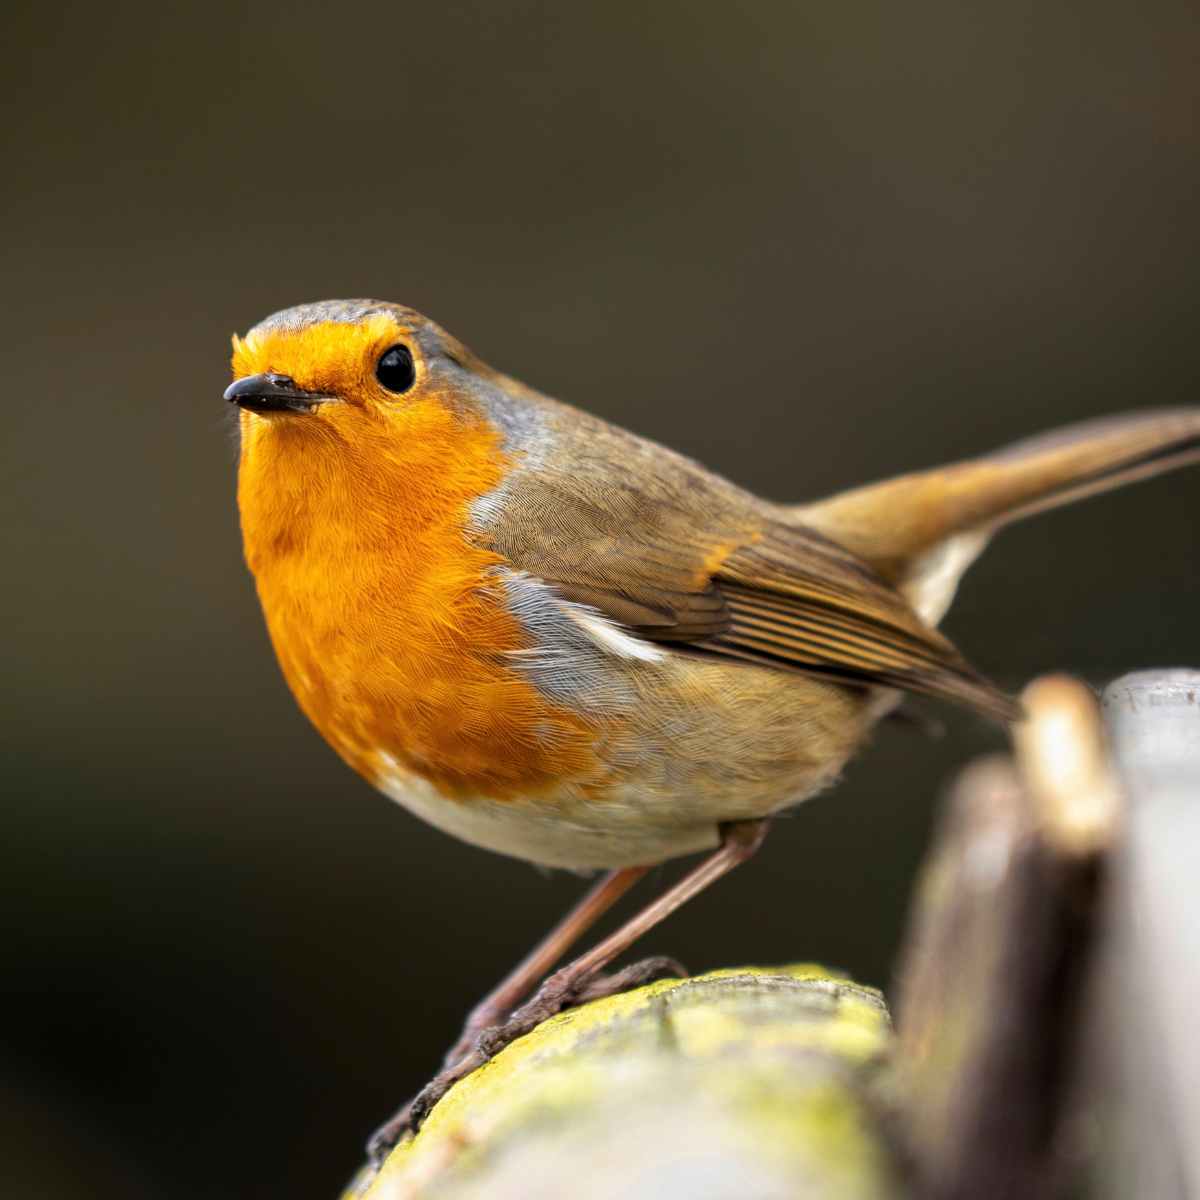 How to Attract Wildlife to your Garden